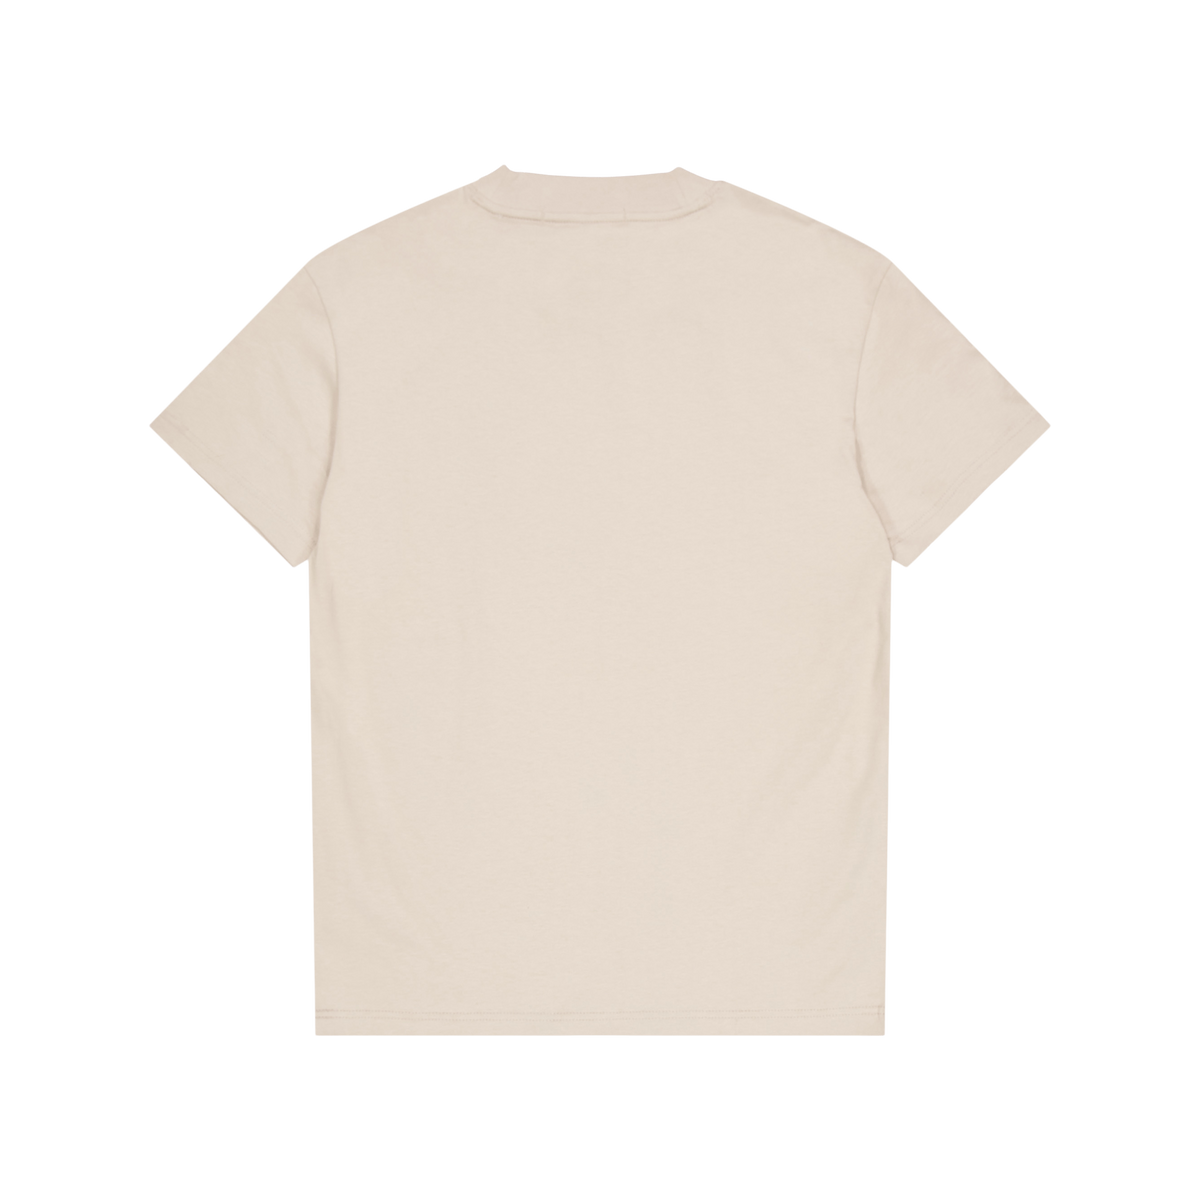 Calvin Klein JeansWoven Tab Tee Ped - Plaza